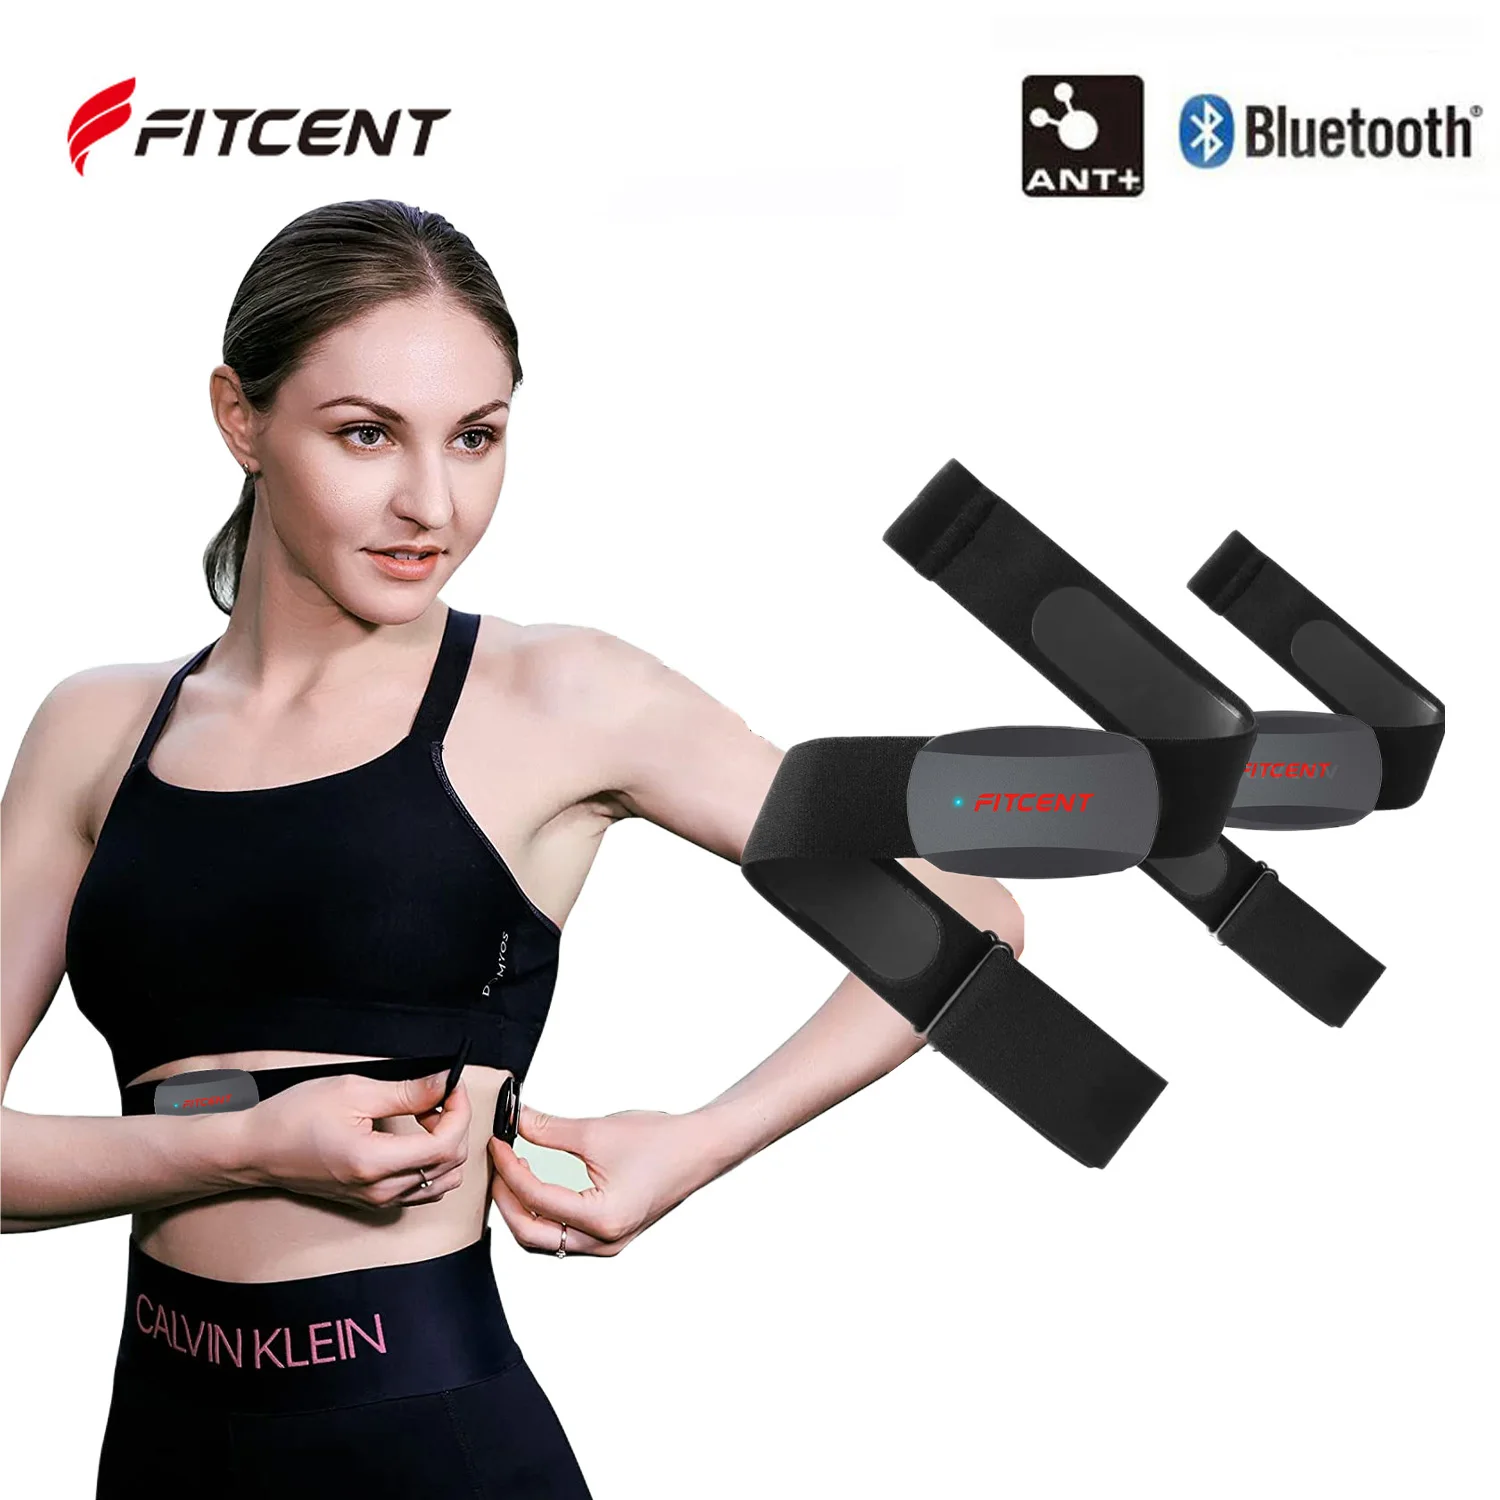 fitcent-2pcs-heart-rate-monitor-chest-strap-ant-bluetooth-dual-hrm-for-zwift-ddp-yoga-strava-polar-wahoo-garmin-watches